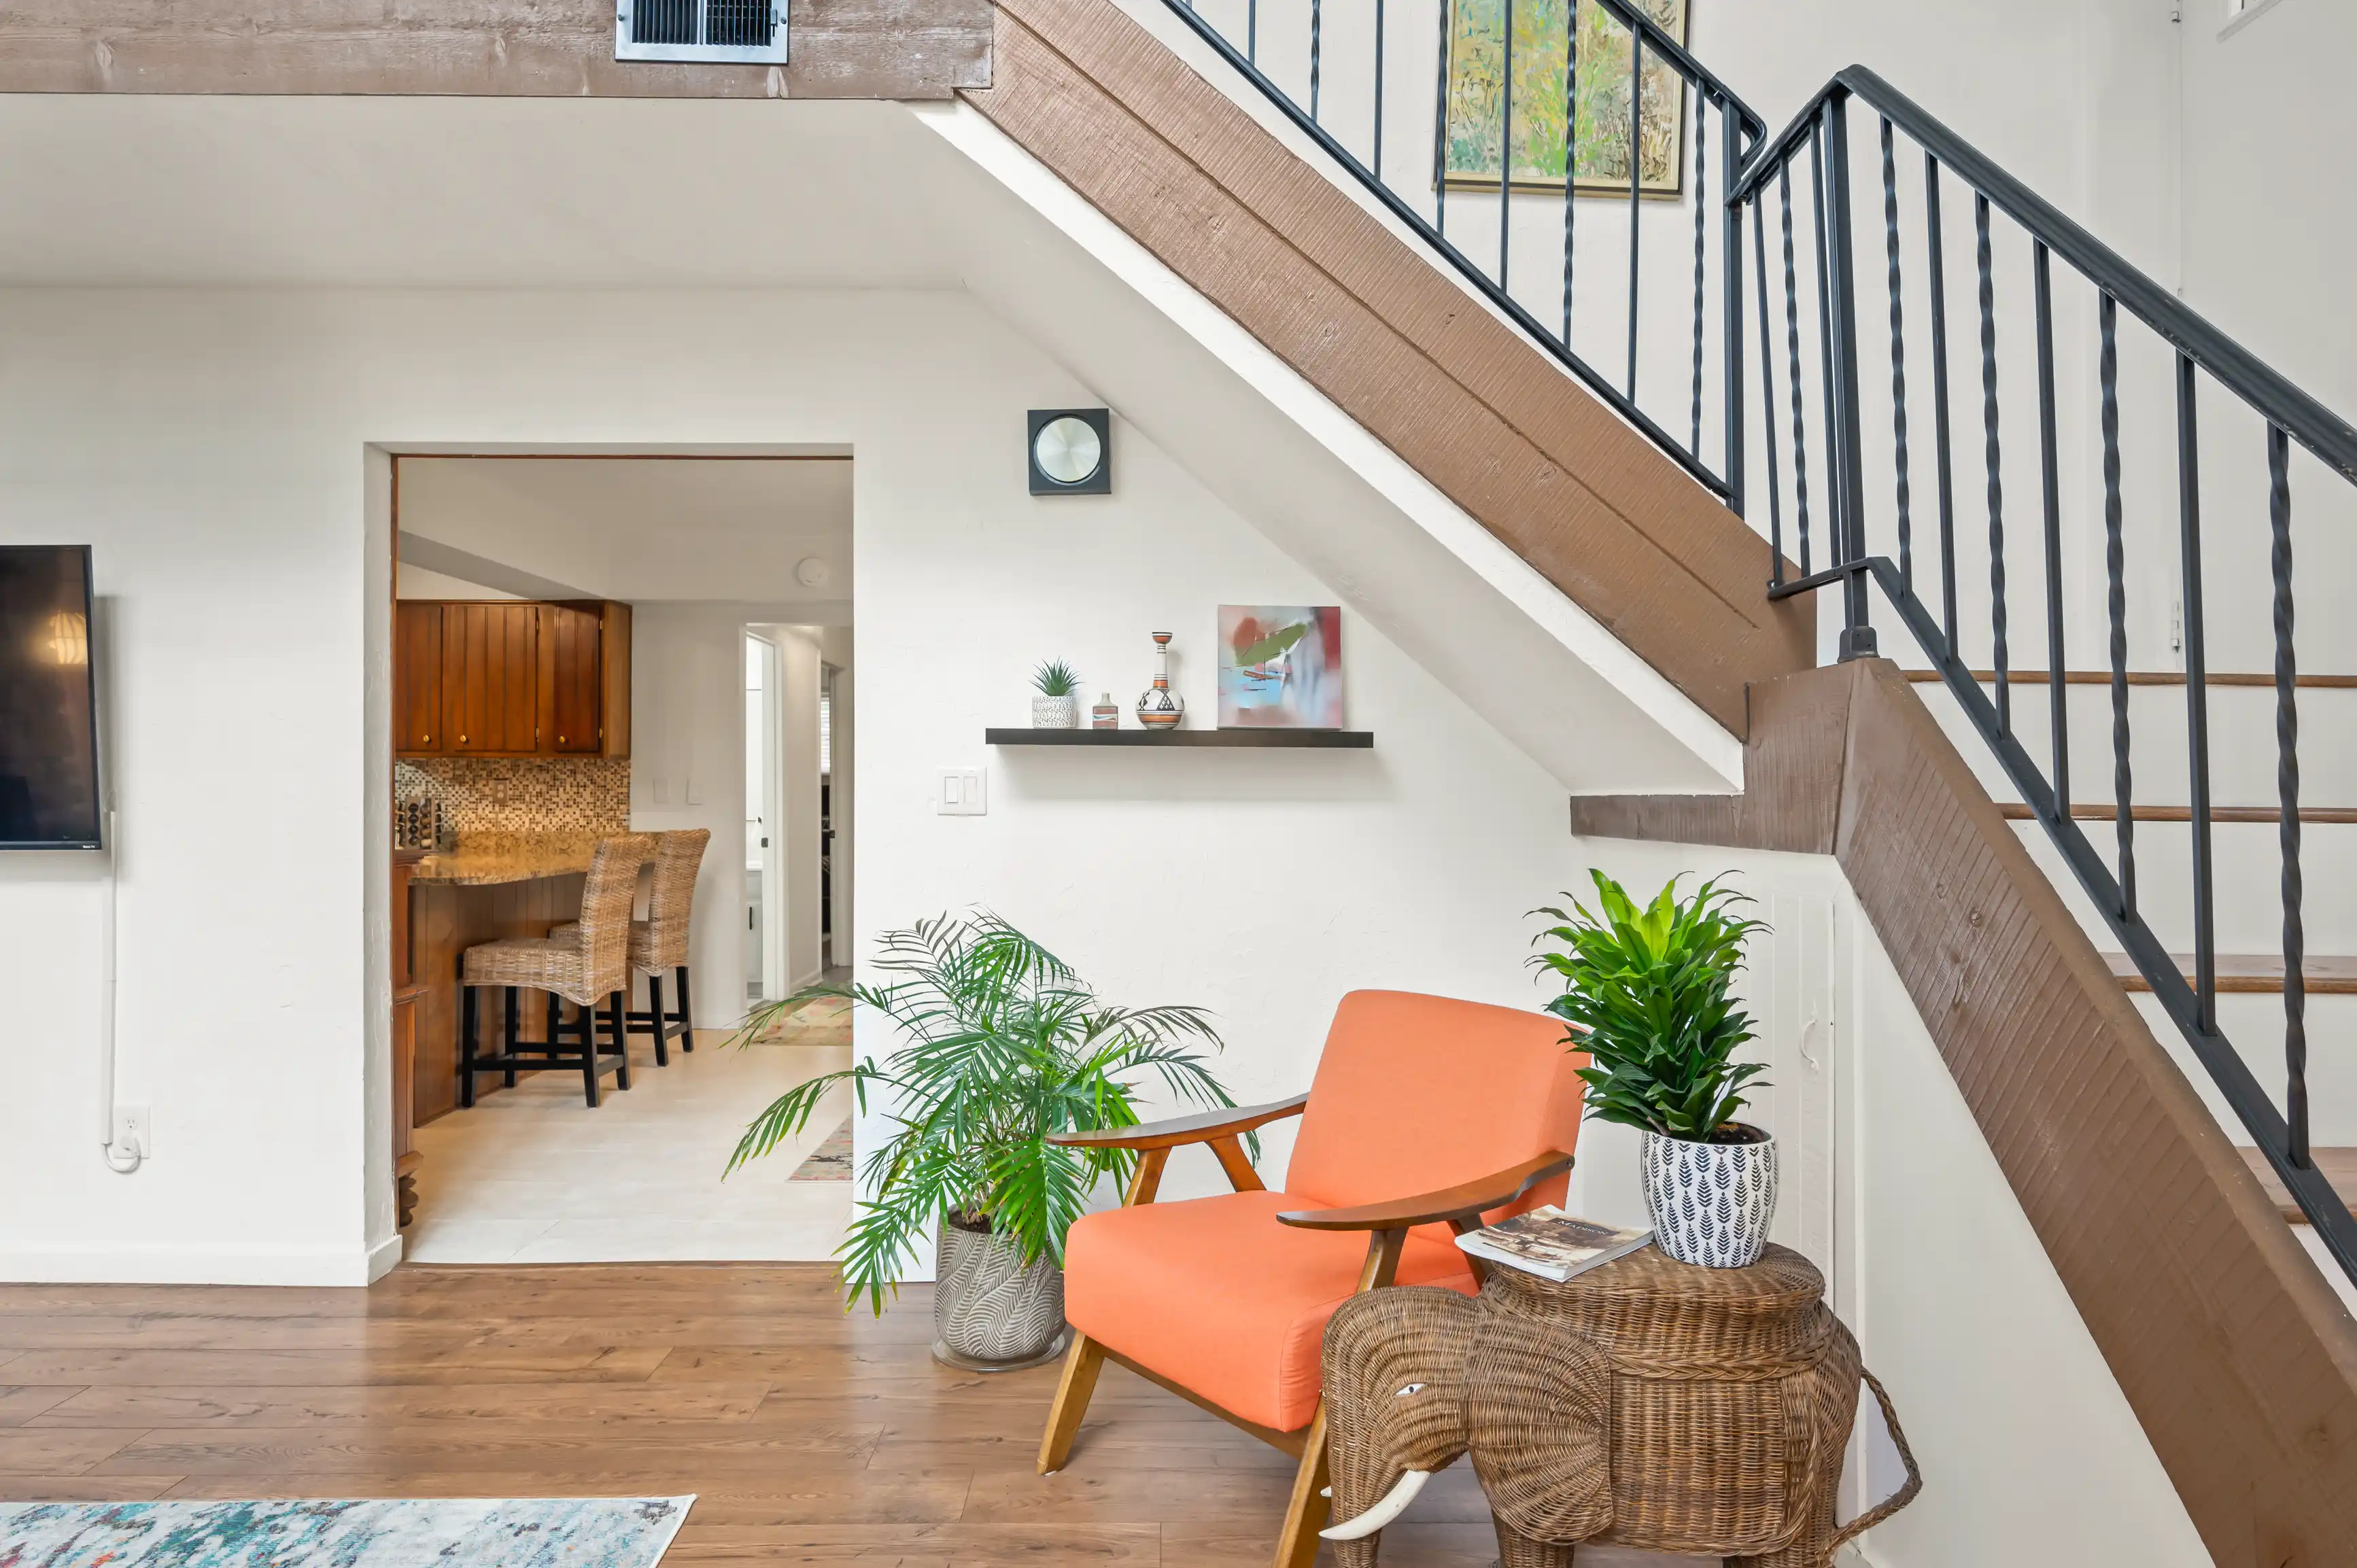 Bright, modern living room interior with orange chair, wicker furniture, indoor plants, wooden staircase with metal banisters, and a kitchen in the background.